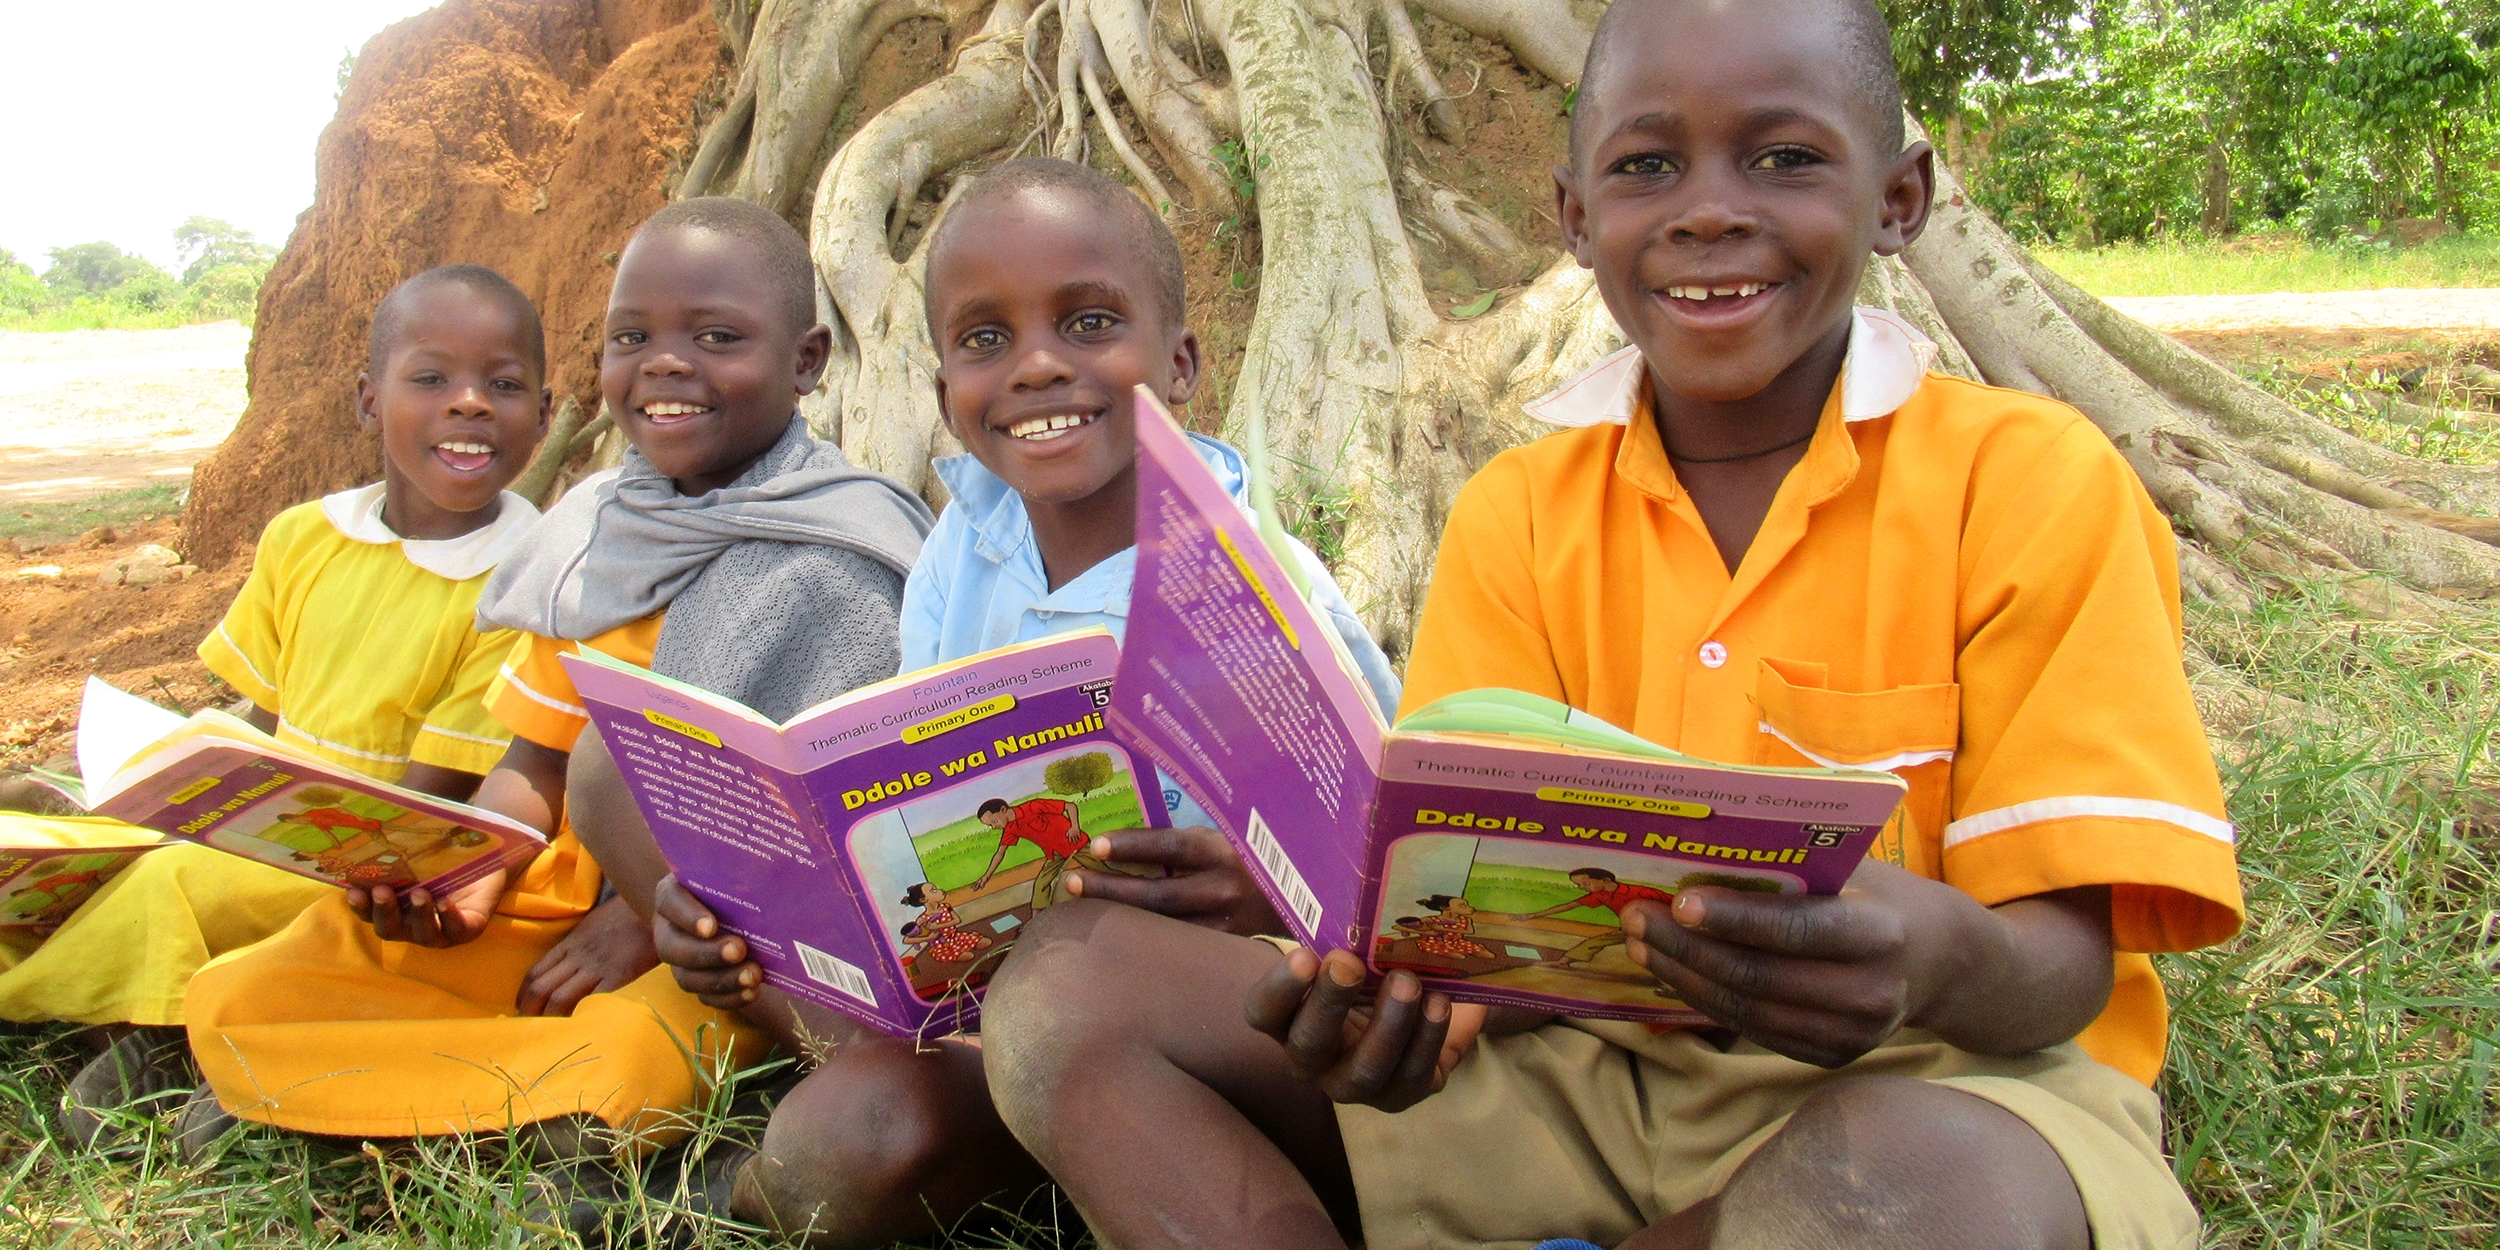 In Uganda, young children smile while holding books